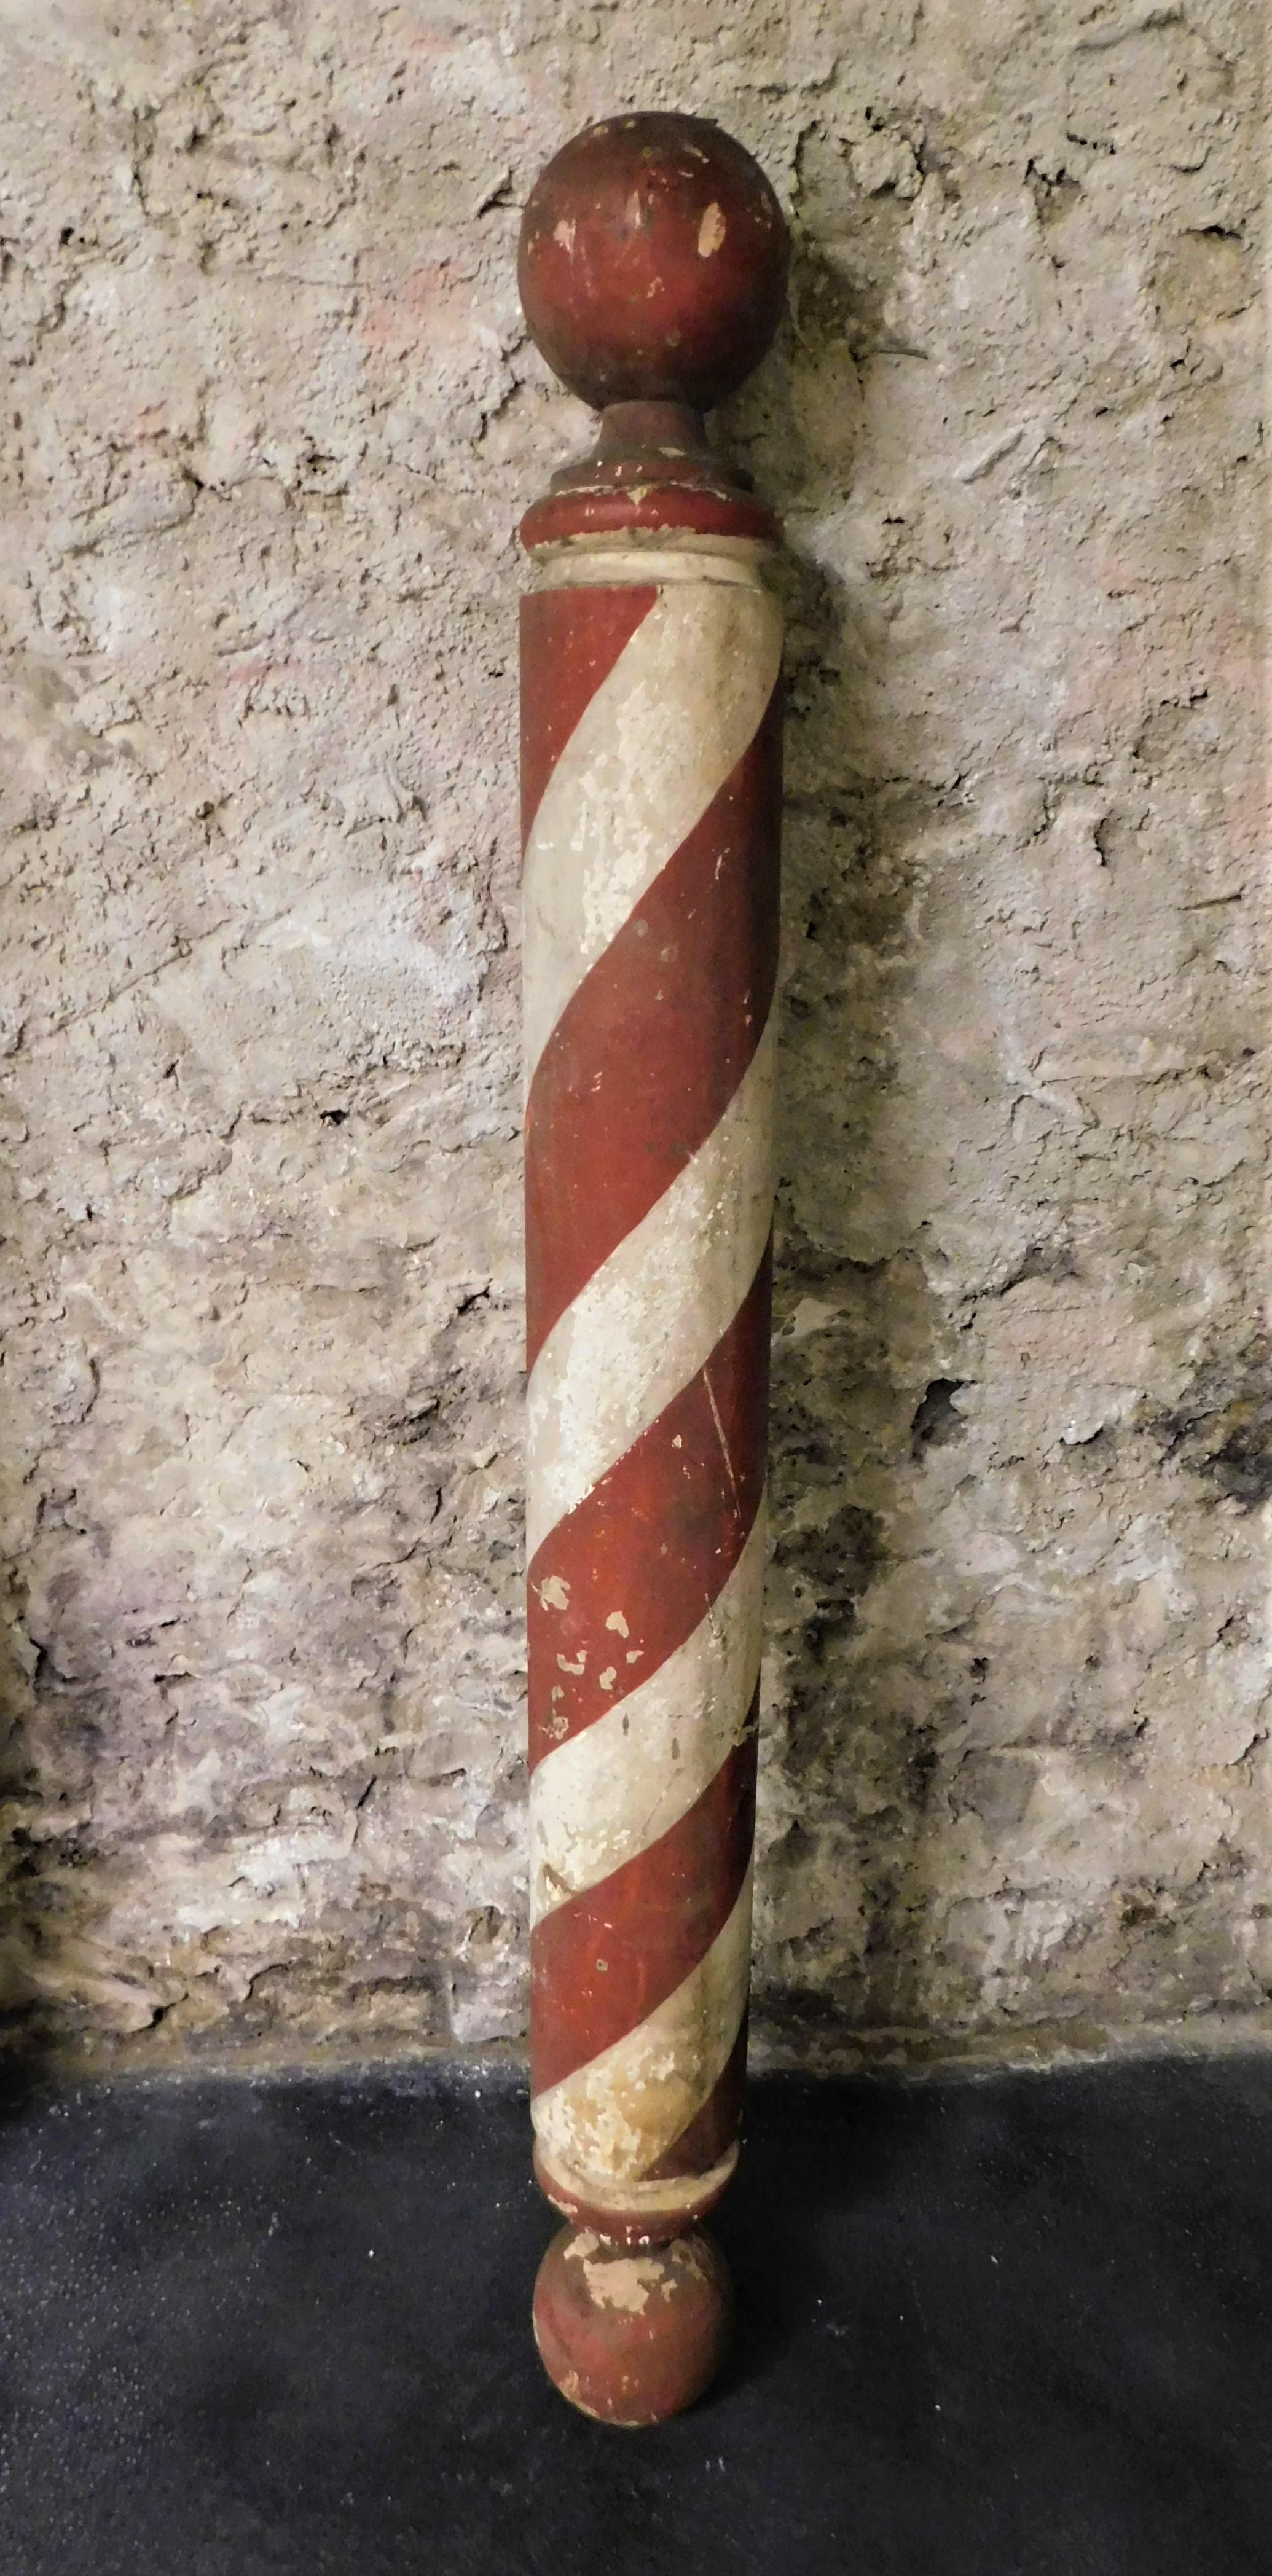 U.S.A. wood barbers pole. Paint loss consistent with the age of the item, circa 1900.